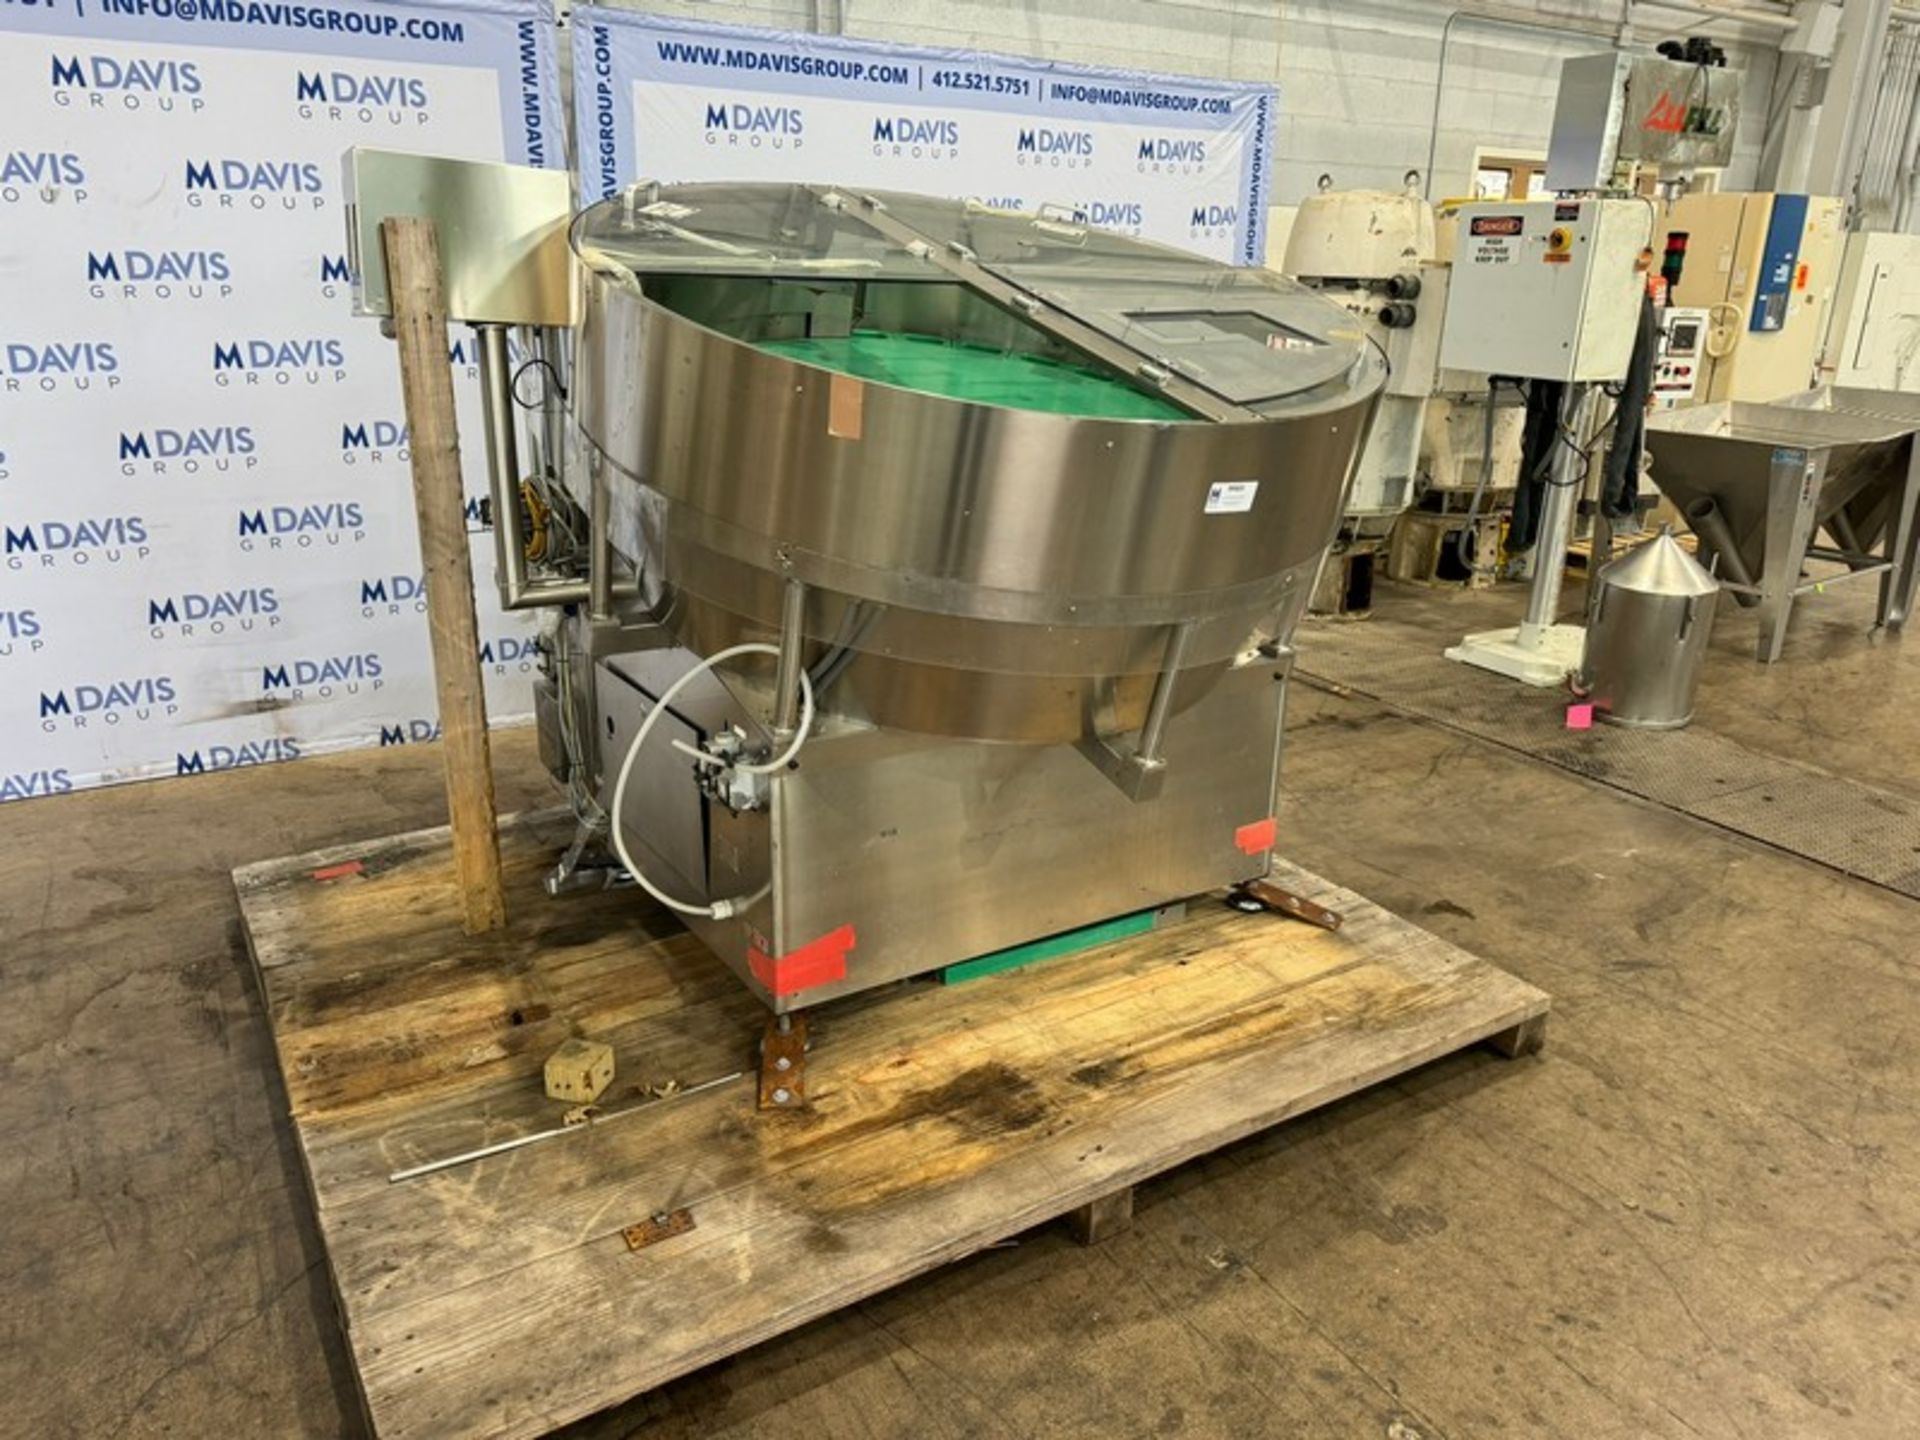 Capmatic S/S Hopper, Mounted on S/S Frame (INV#99405) (Located @ the MDG Auction Showroom 2.0 in